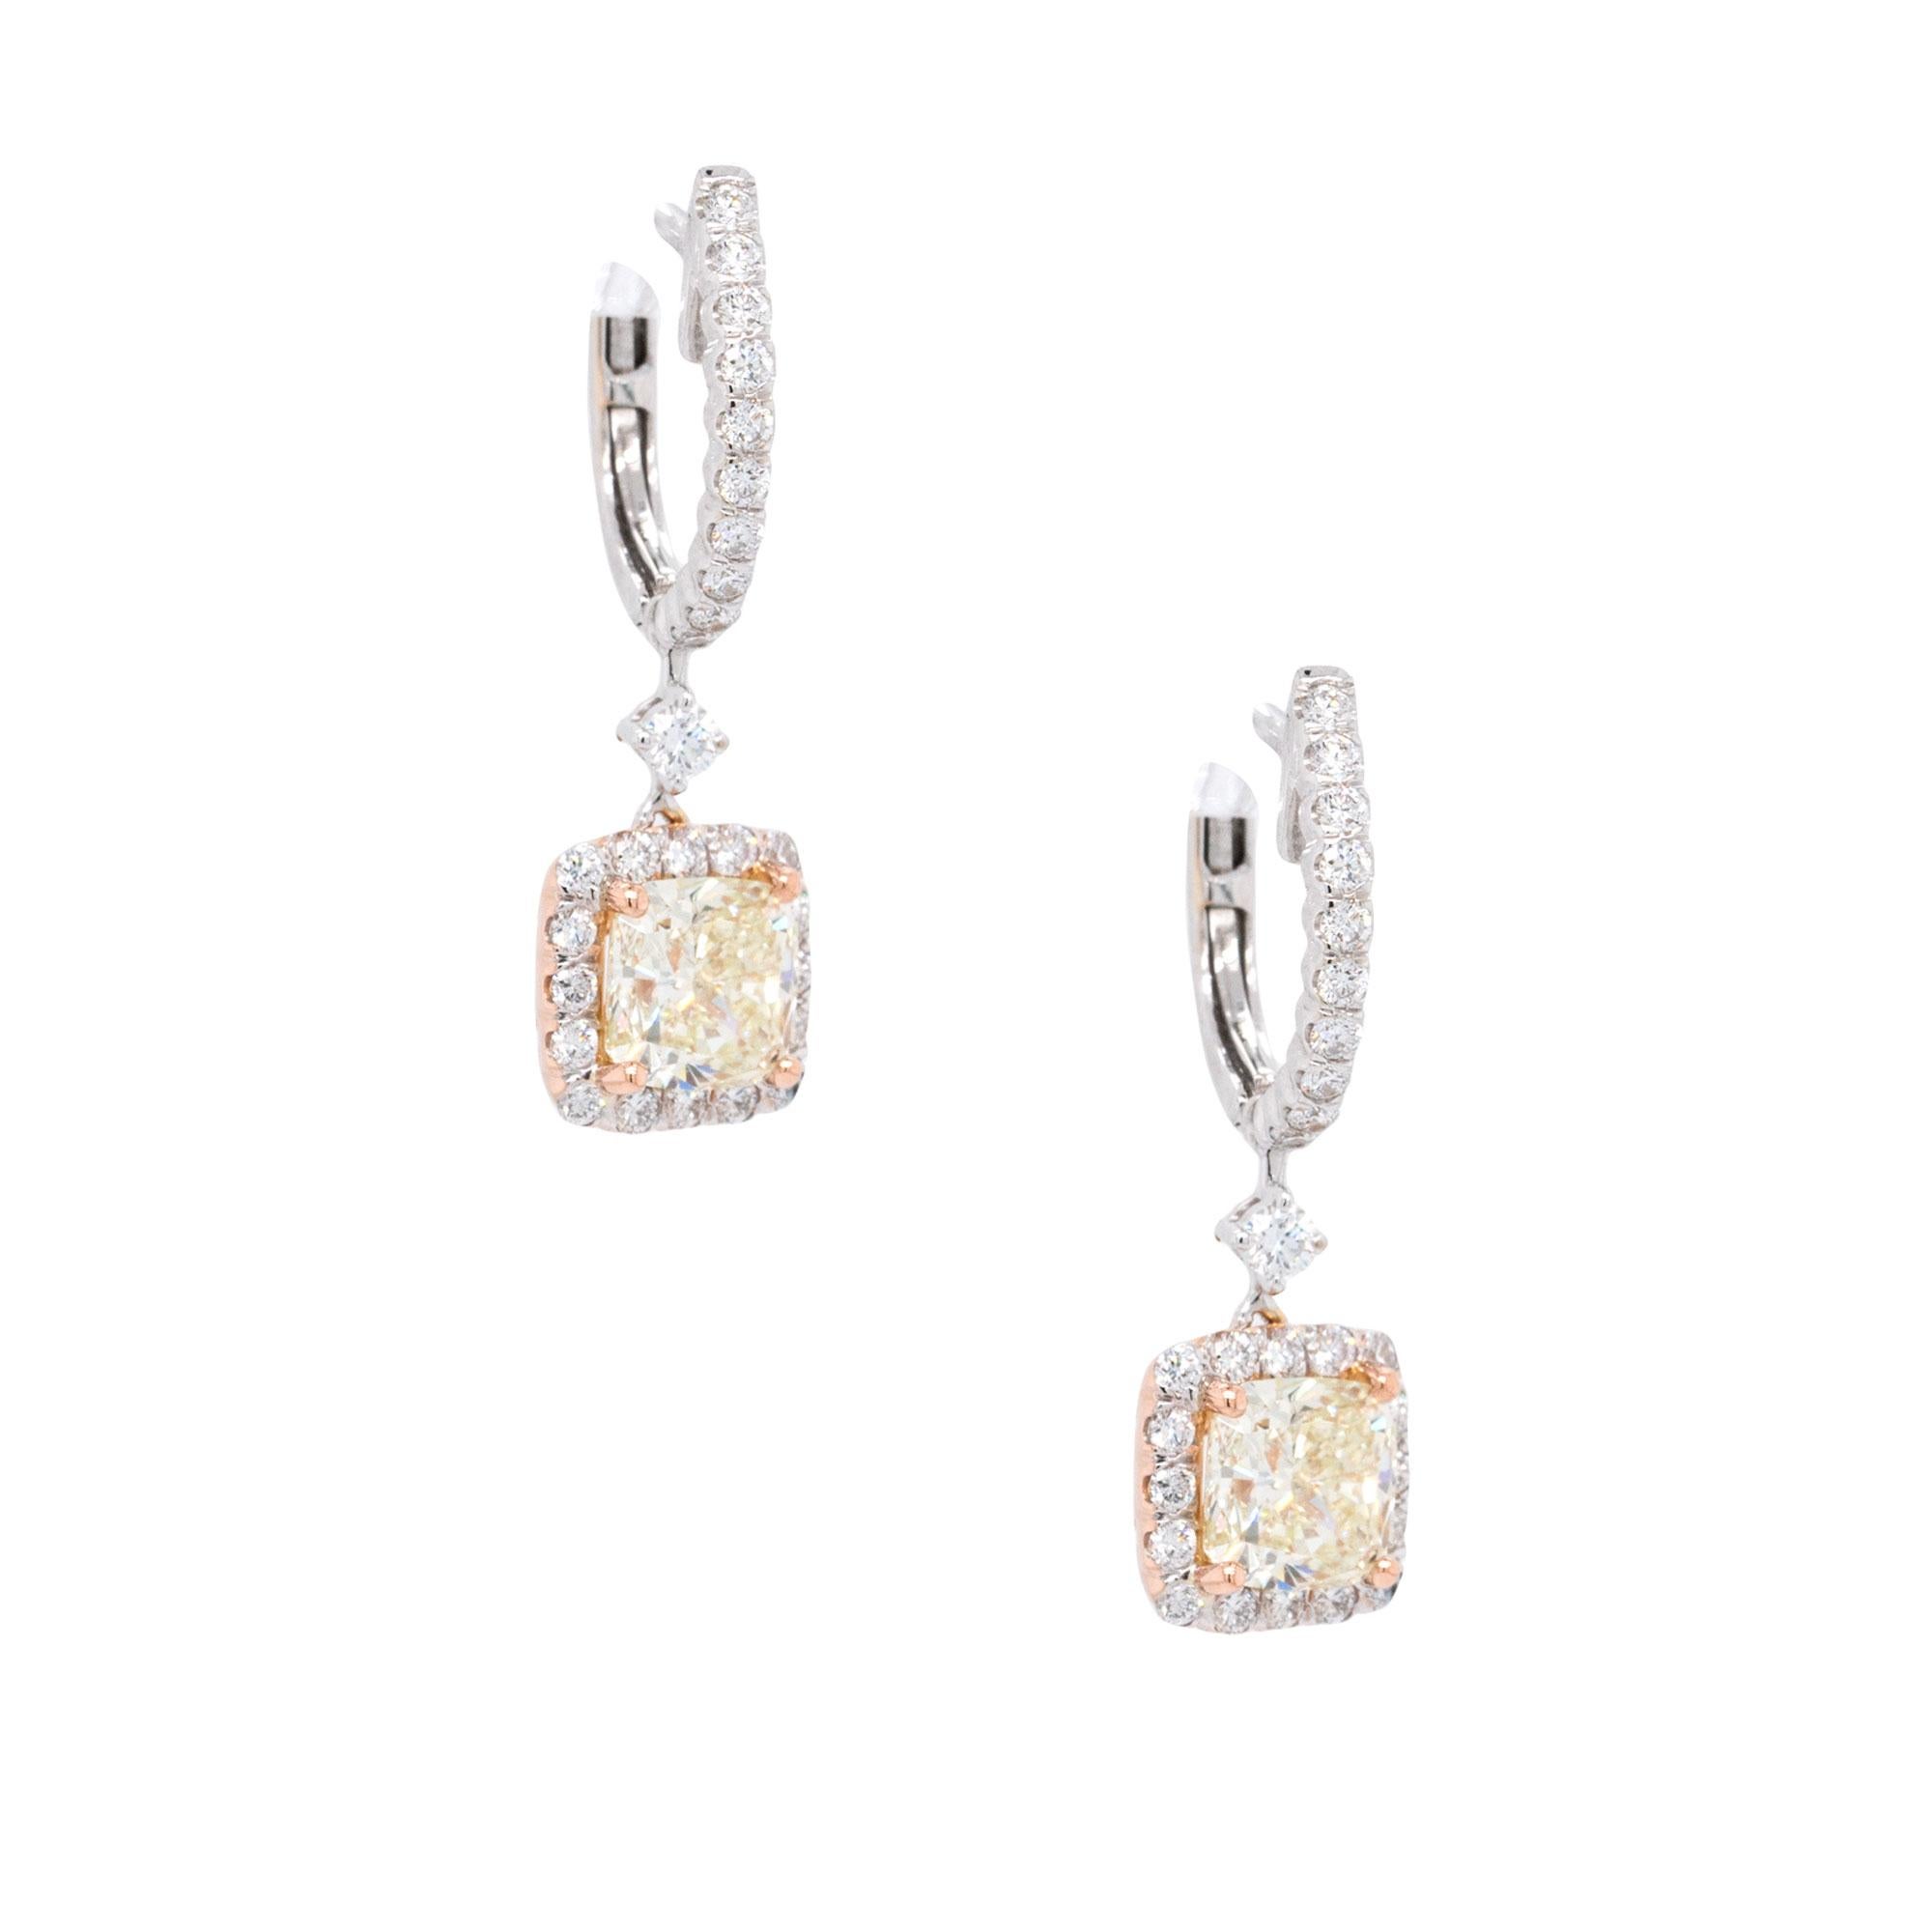 These earrings are made of 18k white gold and feature two natural cushion-cut diamonds, each weighing 1.00 carat. One diamond has an S/T color grade and VS clarity, while the other has an M color grade and VS2 clarity. The earrings also have